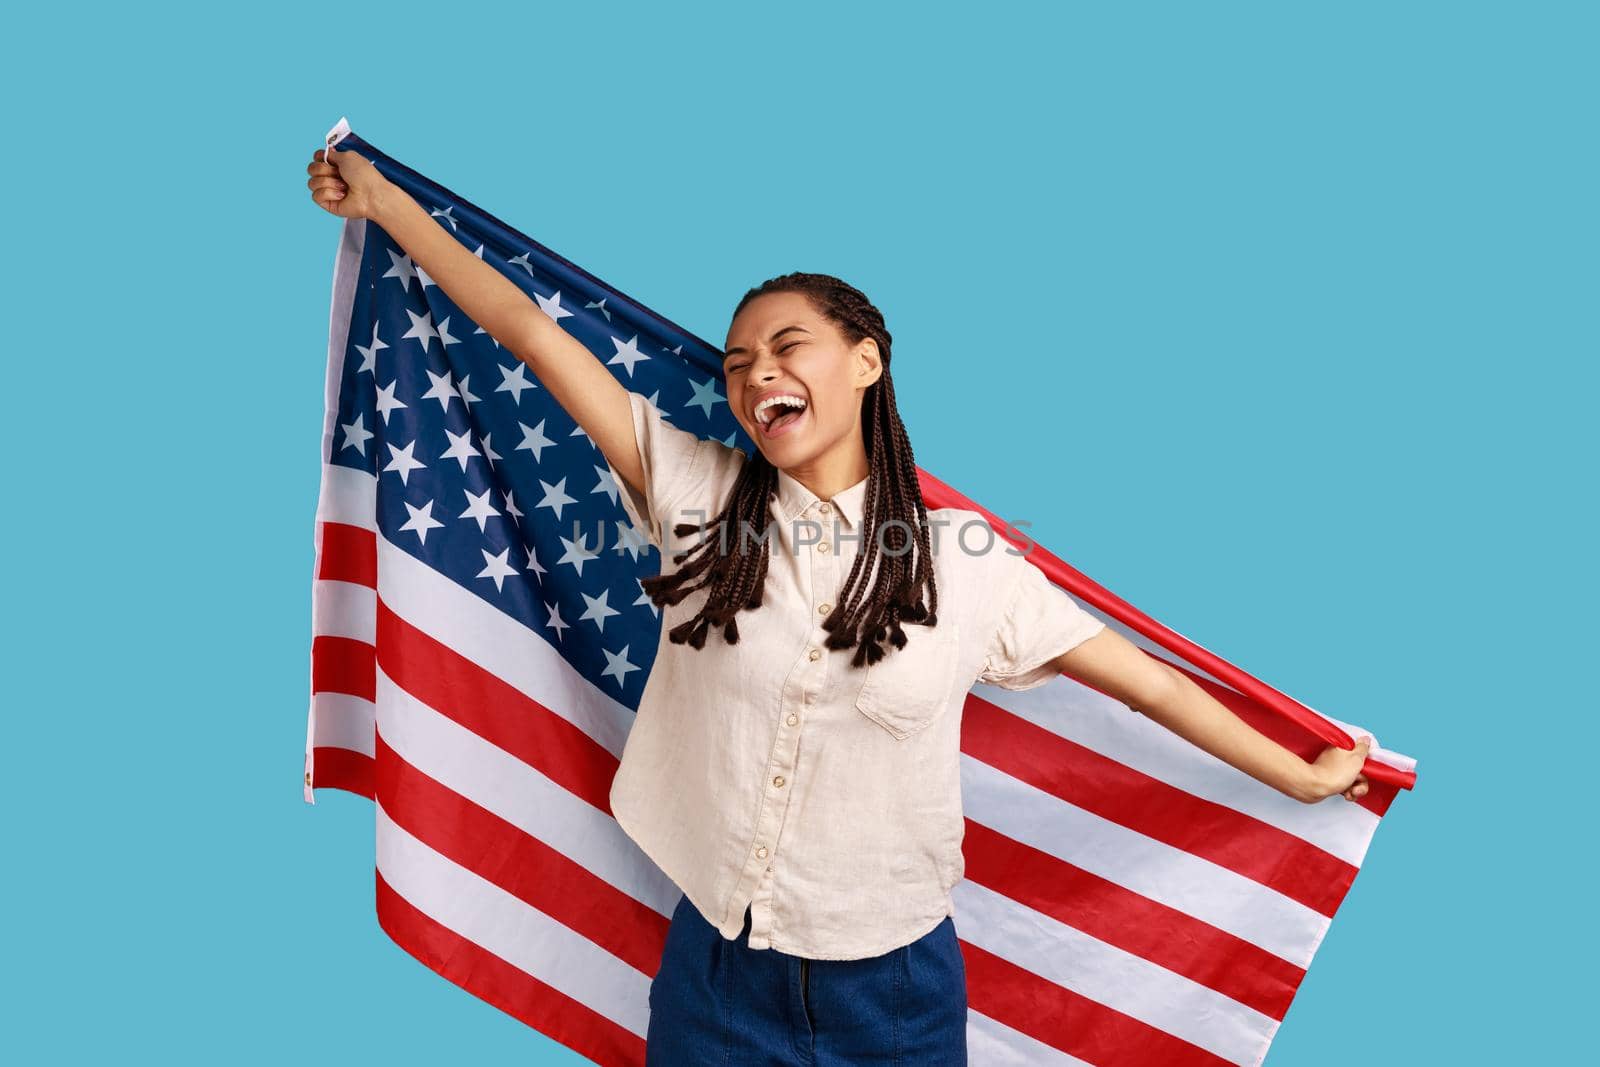 Cheerful attractive woman with black dreadlocks holding USA flag over shoulders and keeps eyes closed and smiling happily, wearing white shirt. Indoor studio shot isolated on blue background.